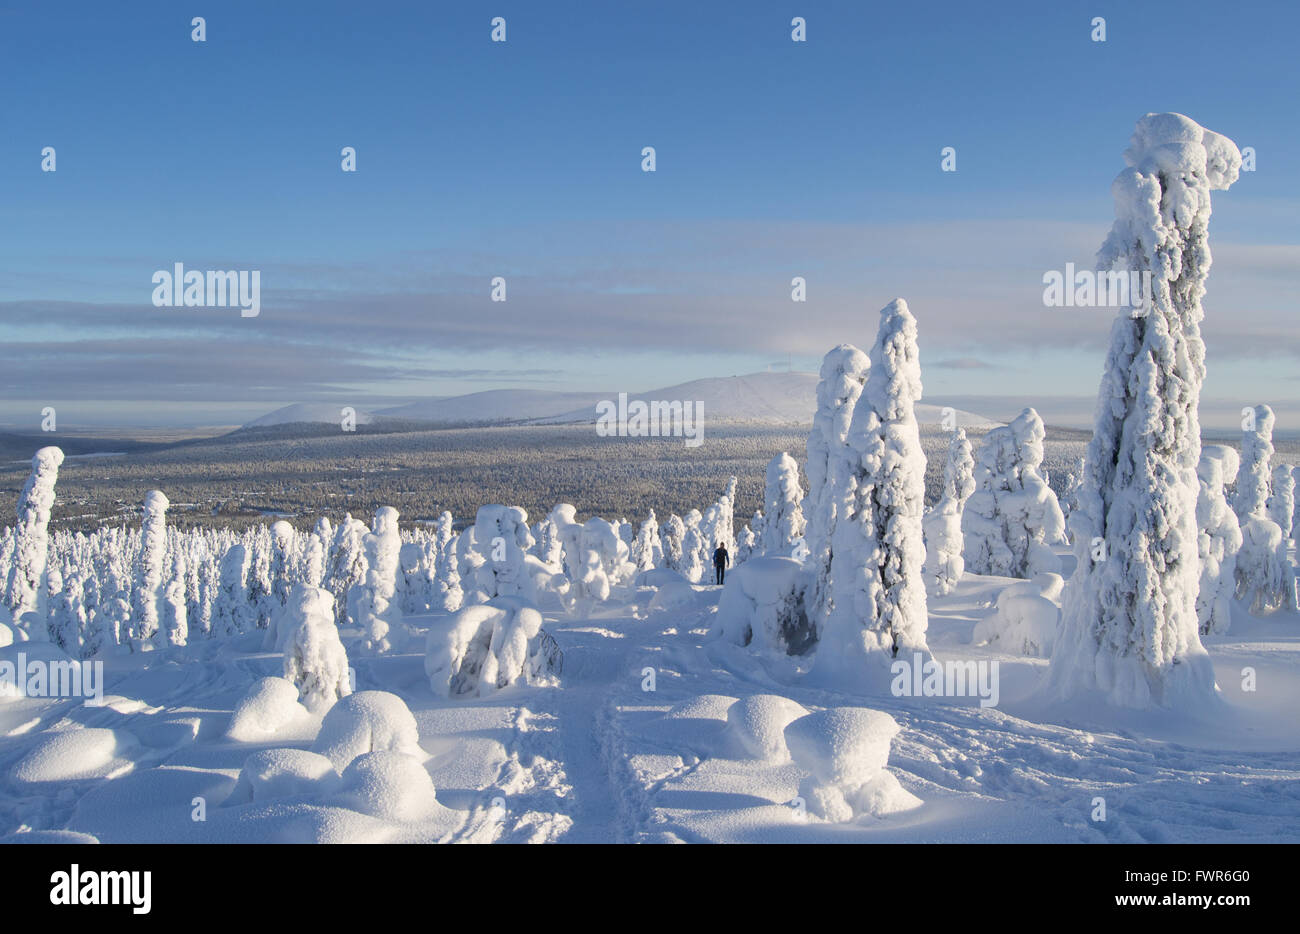 Snow covered trees in the fells of Finnish Lapland. Hiker between the trees. Stock Photo